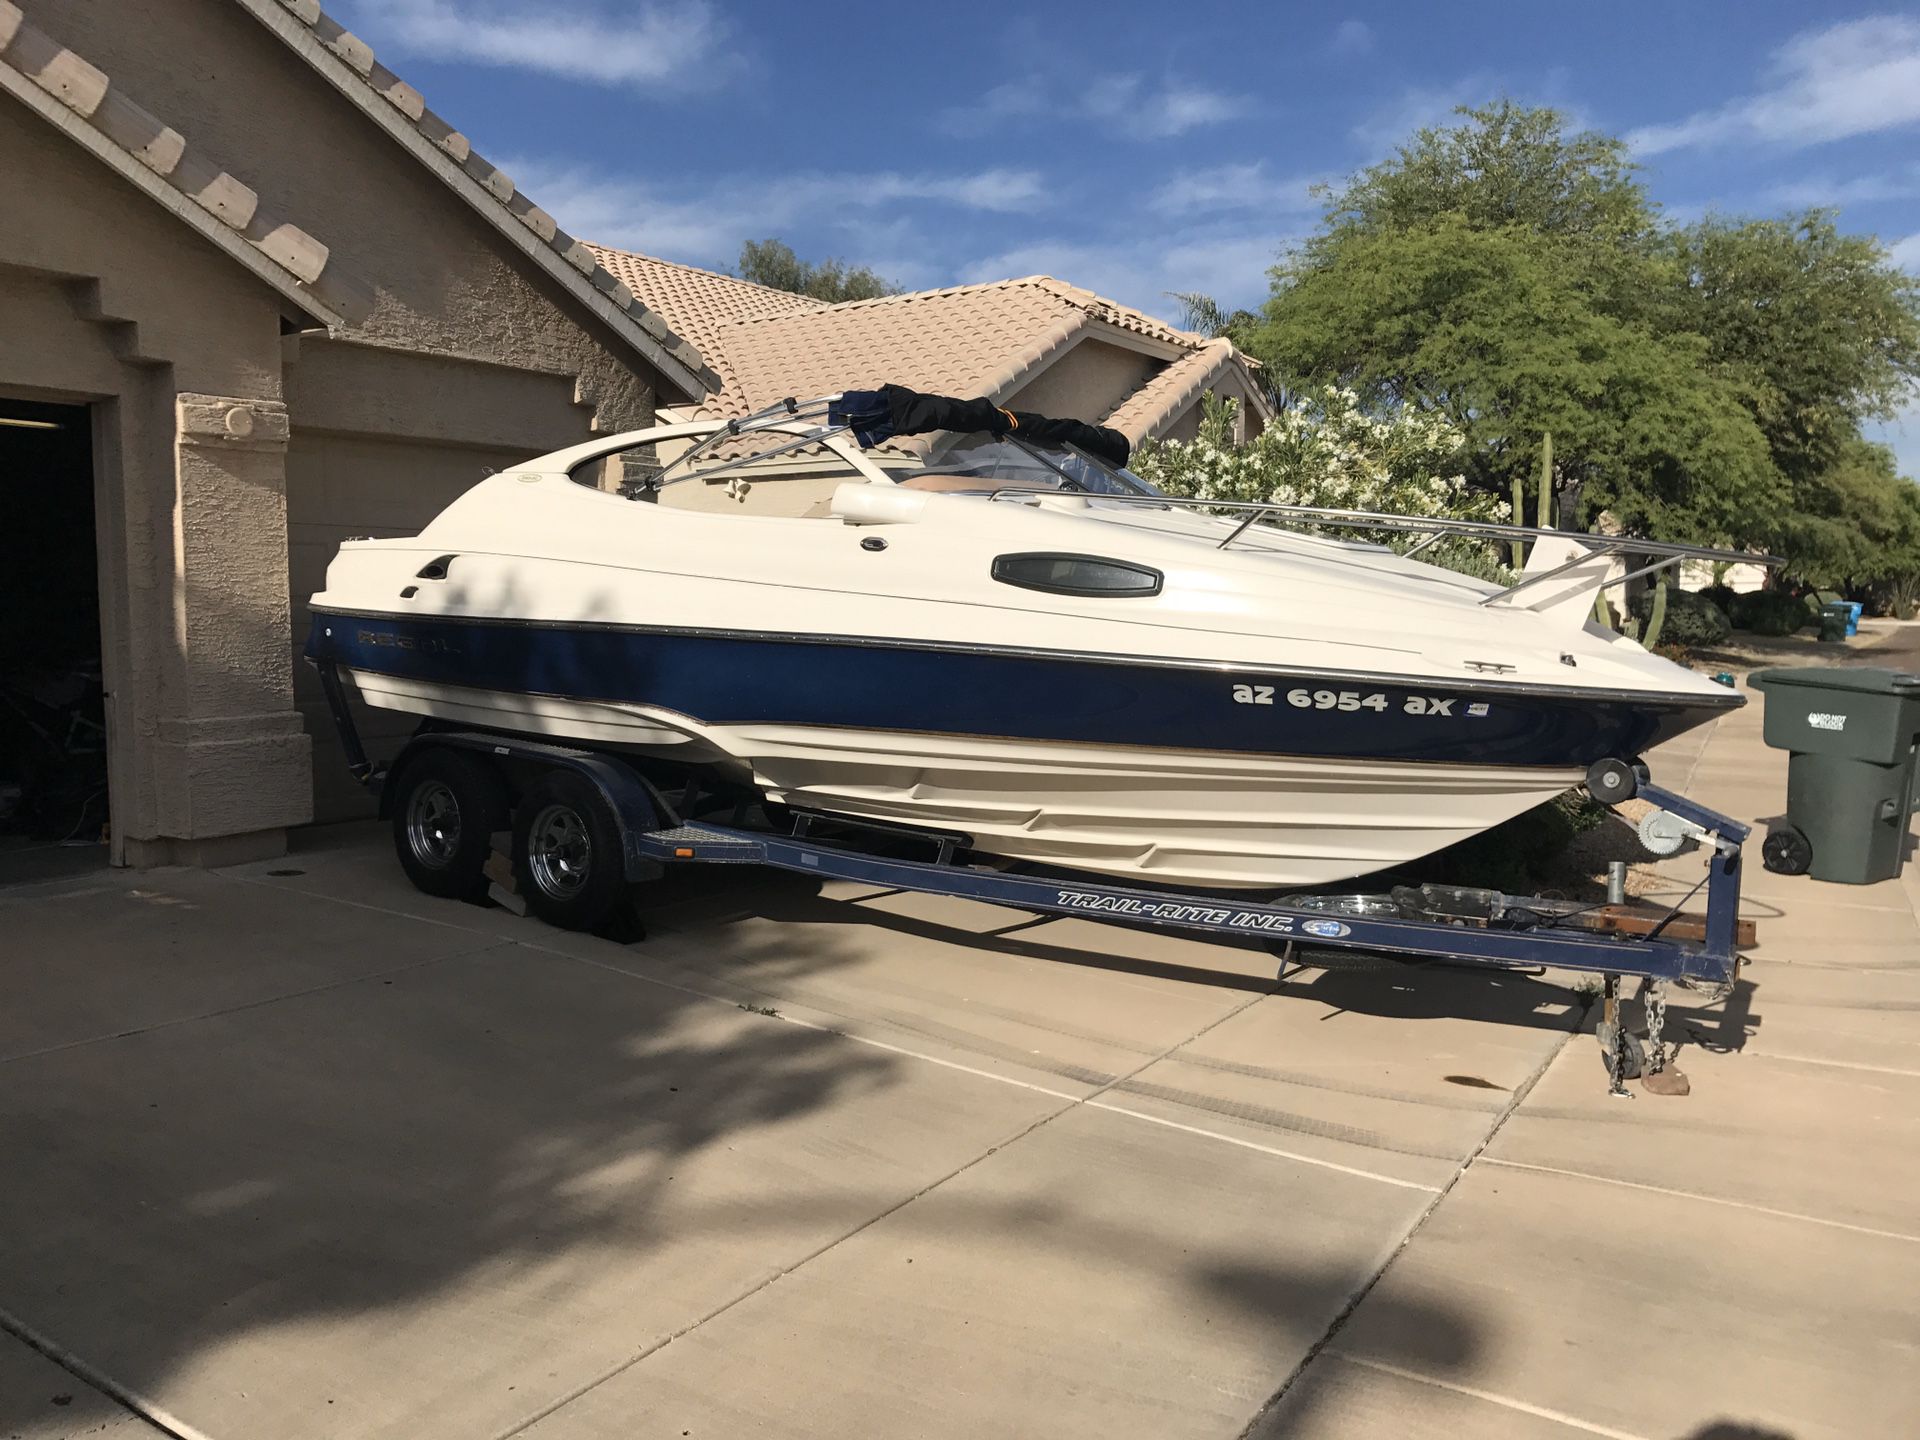 9/5/2020 UPDATED — YES IT IS AVAILABLE :) Fixer upper 1997 Regal Cuddy Cabin Boat 21 ft - MAJOR PRICE CUT